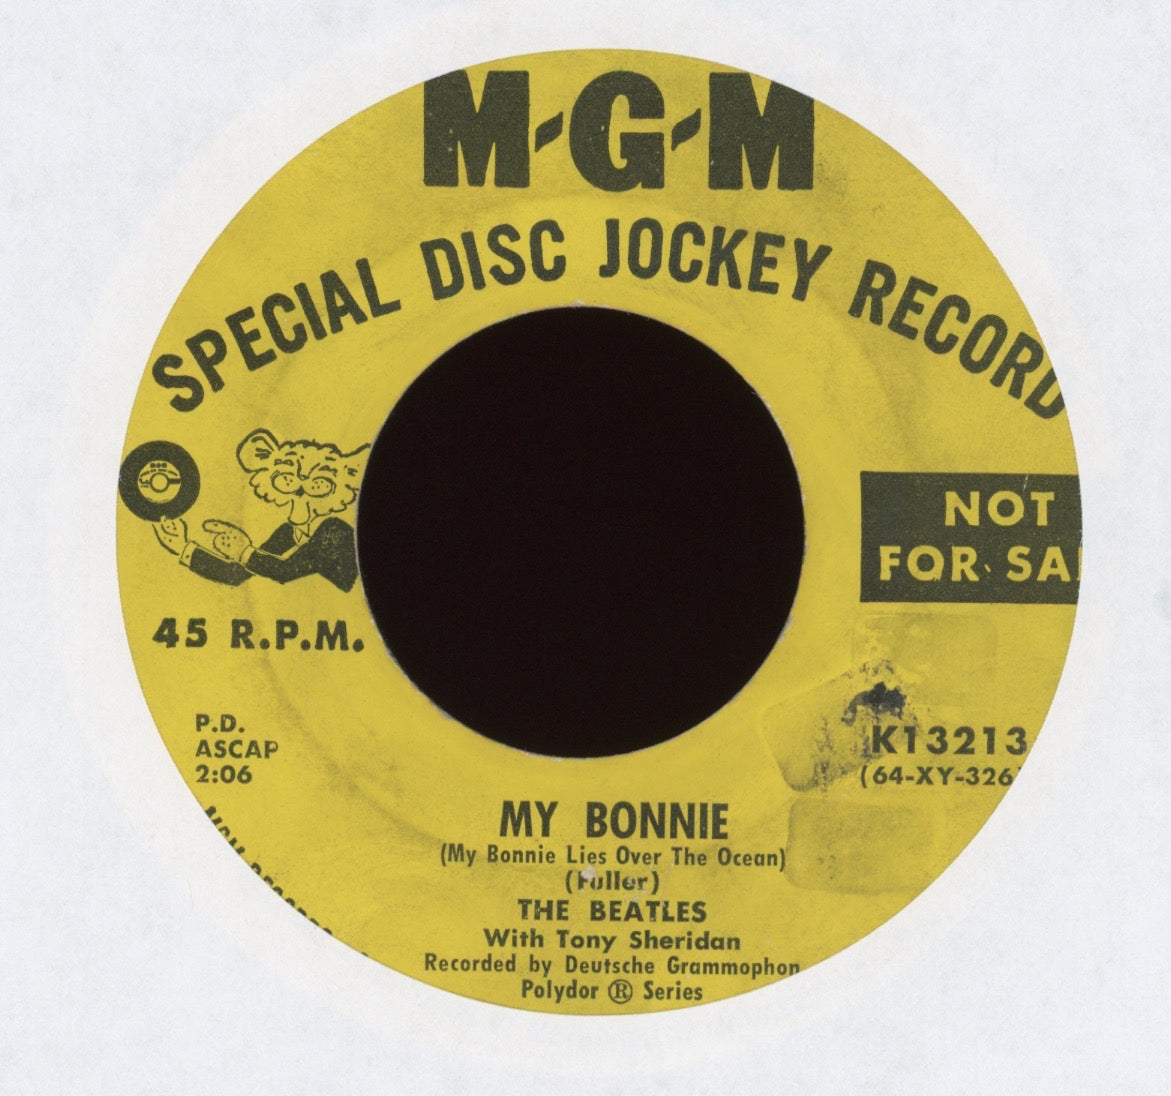 The Beatles With Tony Sheridan - My Bonnie on MGM Promo Rock 45